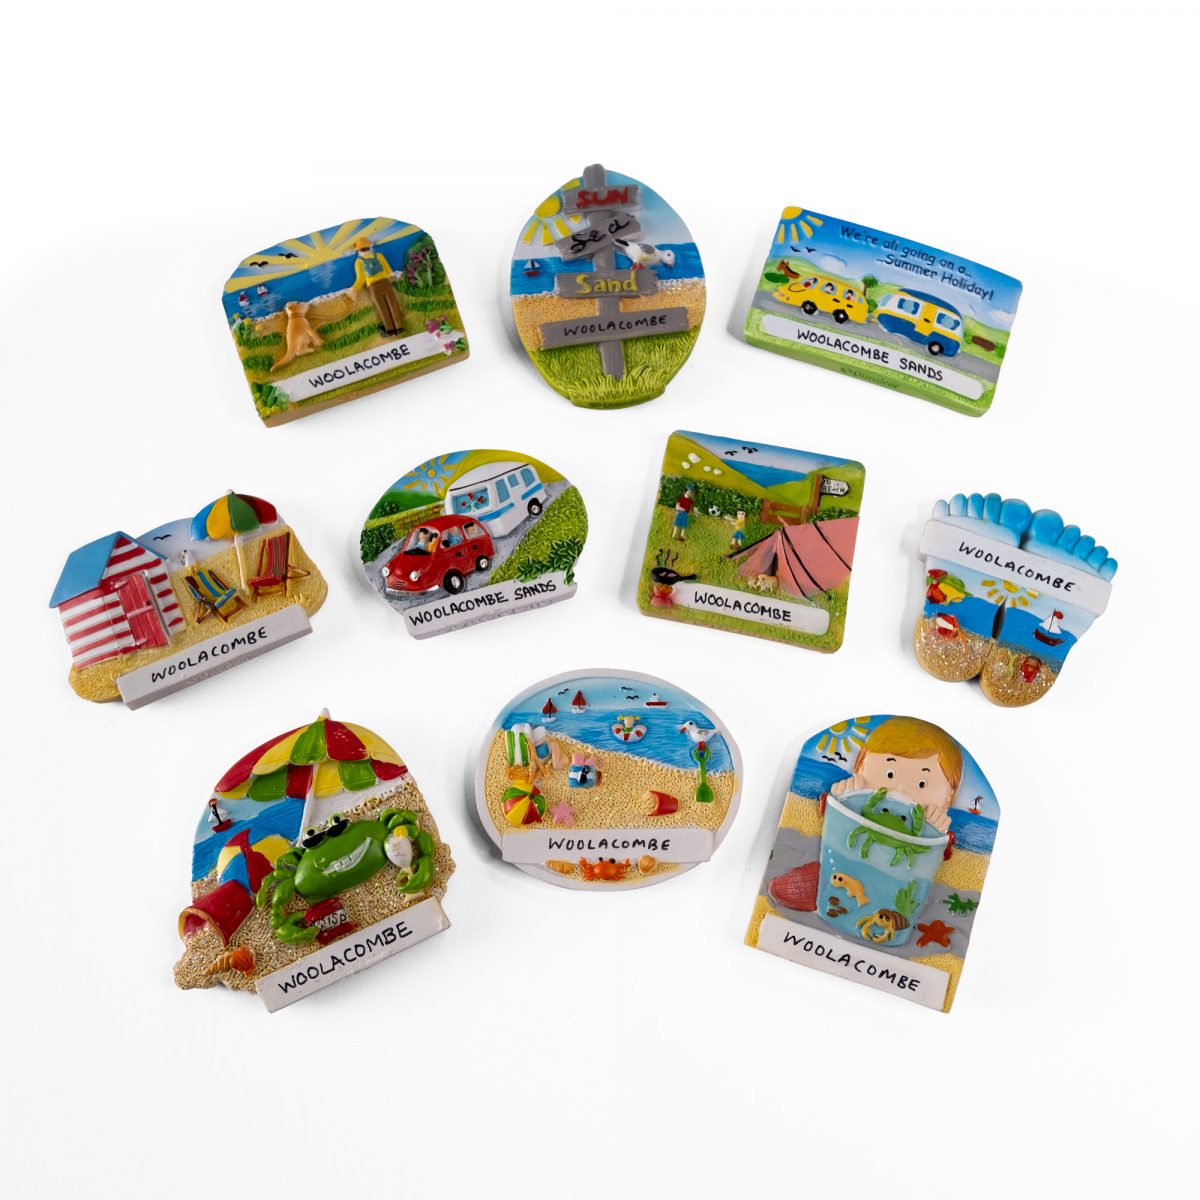 Woolacombe themed fridge magnets 10 individual designs cast in resin